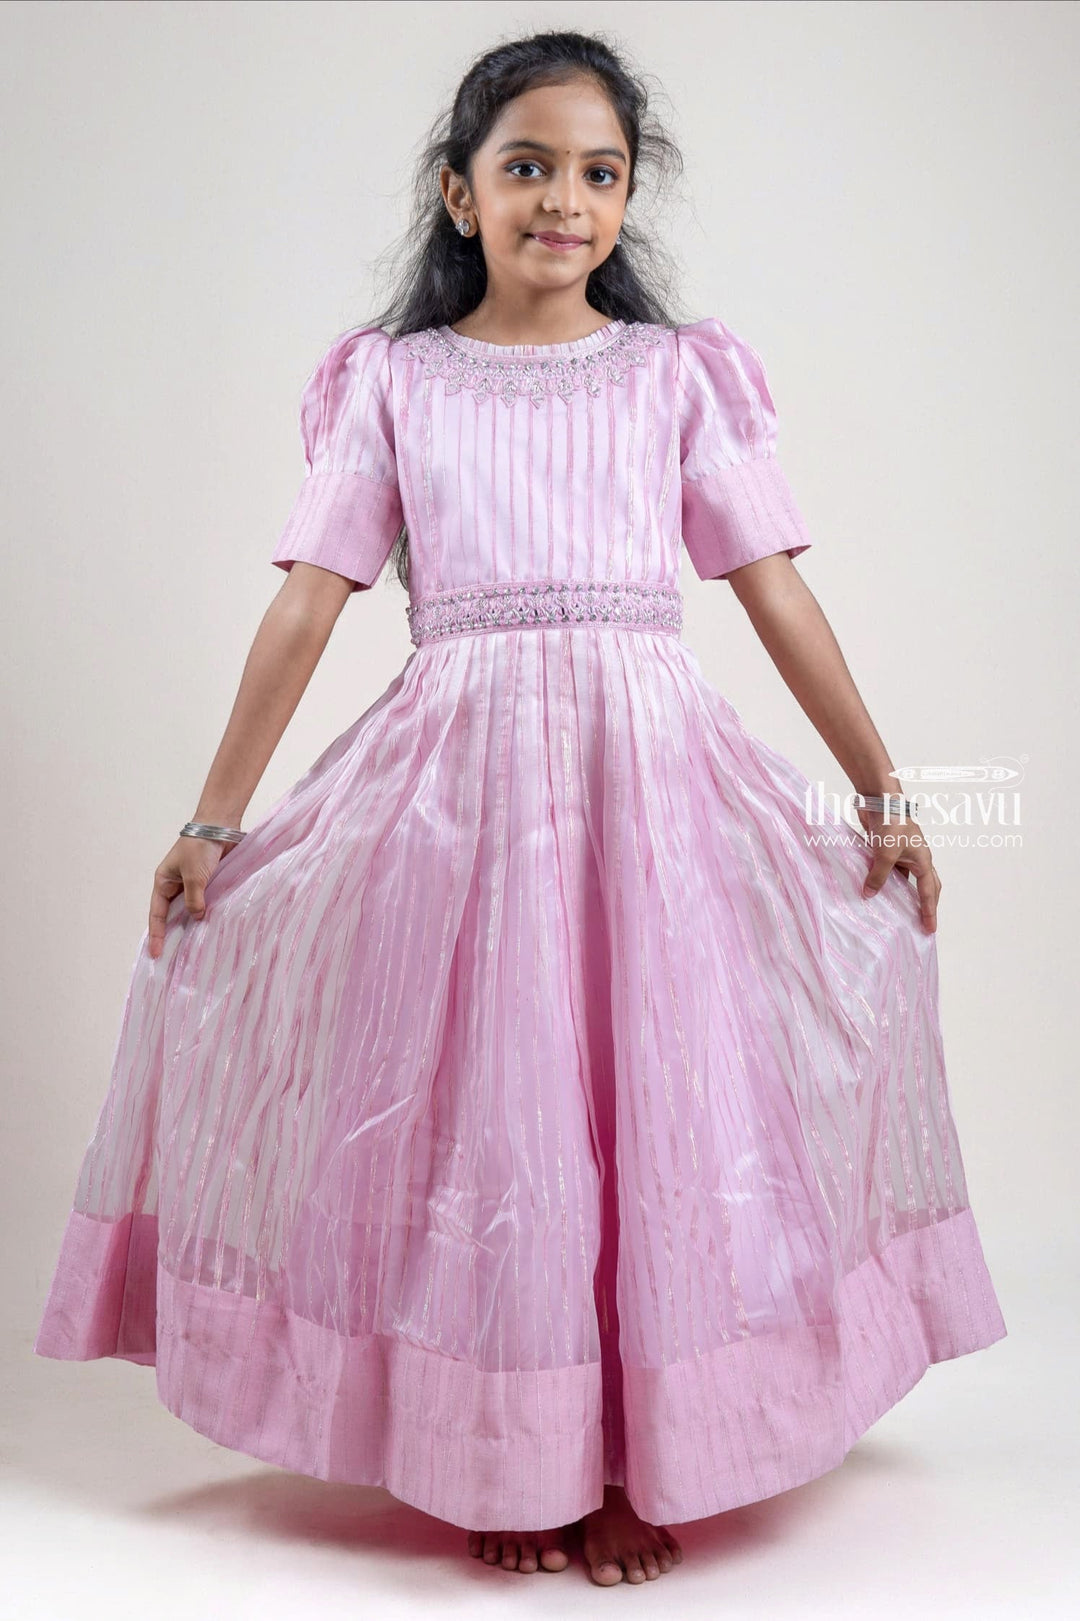 The Nesavu Party Gown Pink Organza Anarkali Dress with Faux Mirror and Rhinestones Embellished Hip Band Nesavu 18 (2Y) / Pink / Organza GA136-18 Pink Organza Anarkali Dress with Faux Mirror and Rhinestones Embellished Hip Band | The Nesavu